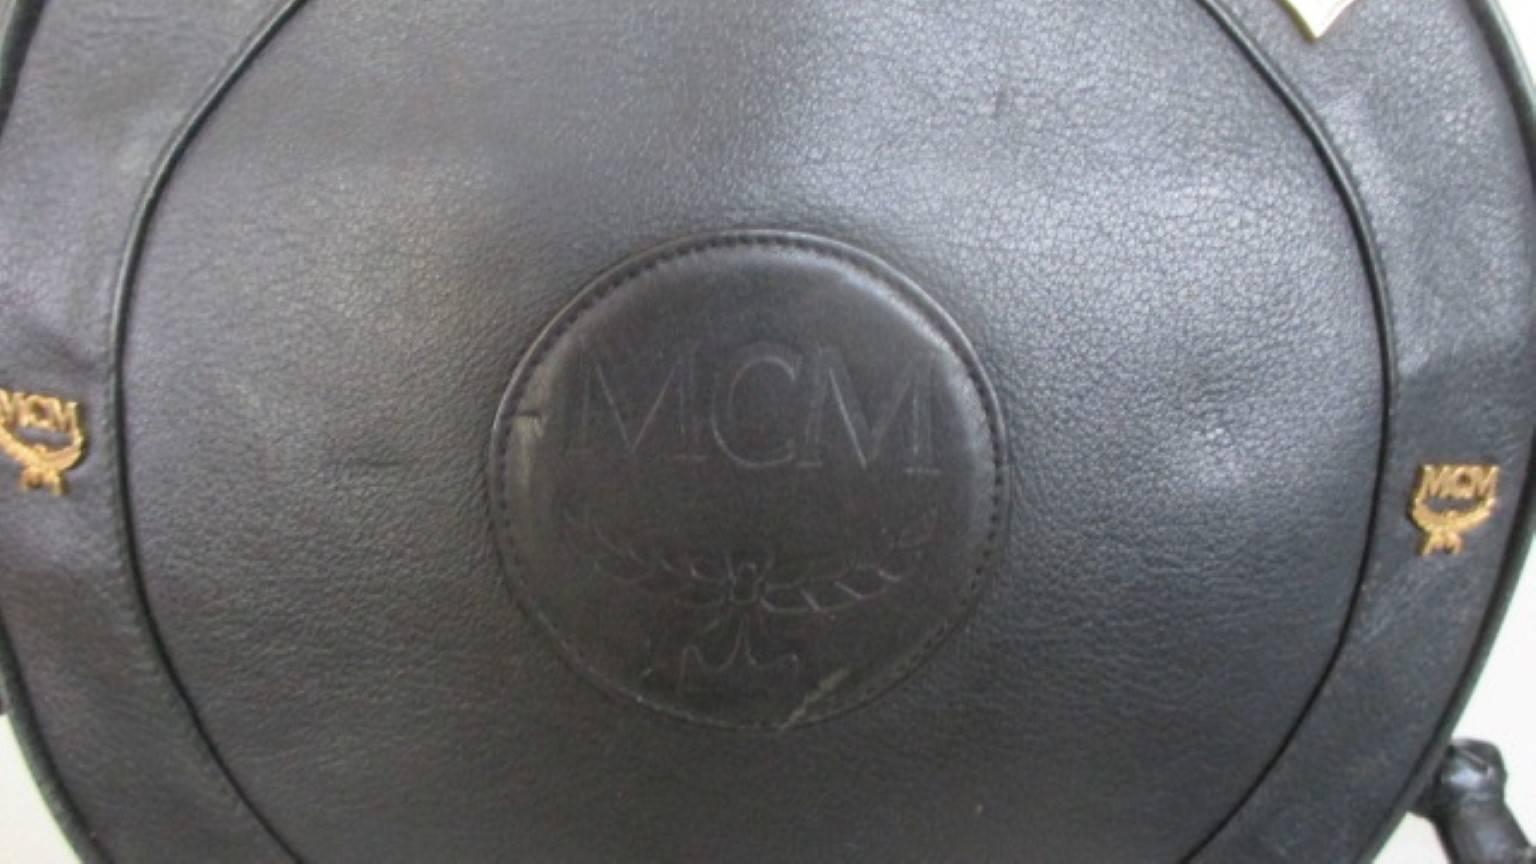 Vintage 1990 MCM Suzy Wong cross body bag -collectors item- designed by Michael Cromer, Munchen
Color: black soft leather
Gold hardware logo studs and fringes
Inside has 1 zipper and 1 open pocket
Condition is fair with minor wear at the gold